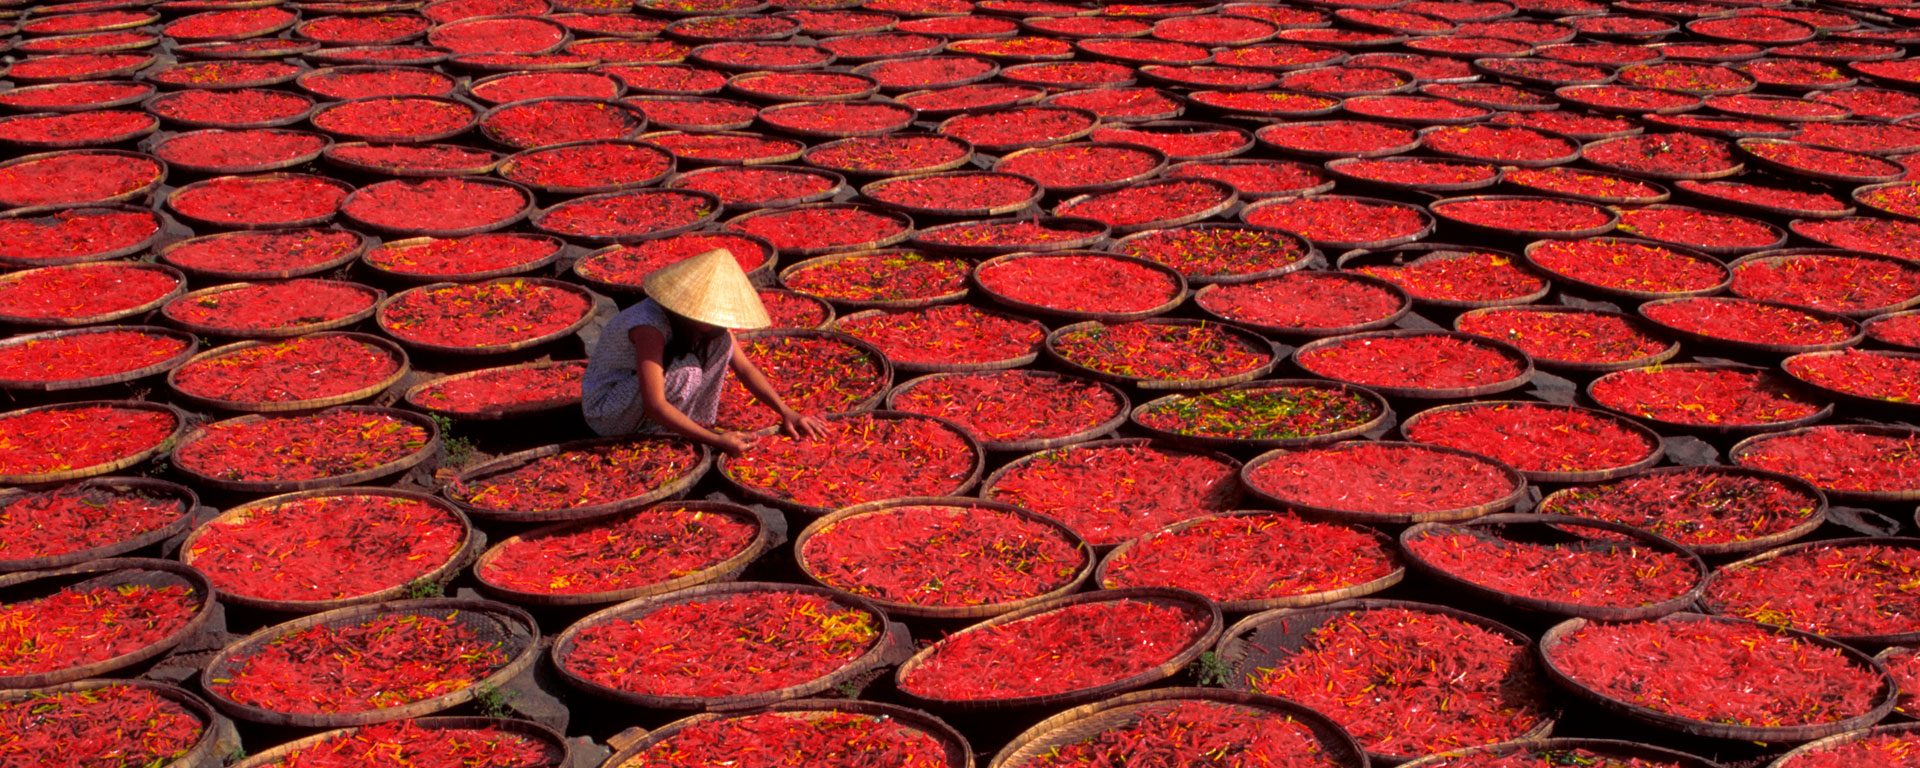 Candy drying in baskets under the sun, Vietnam